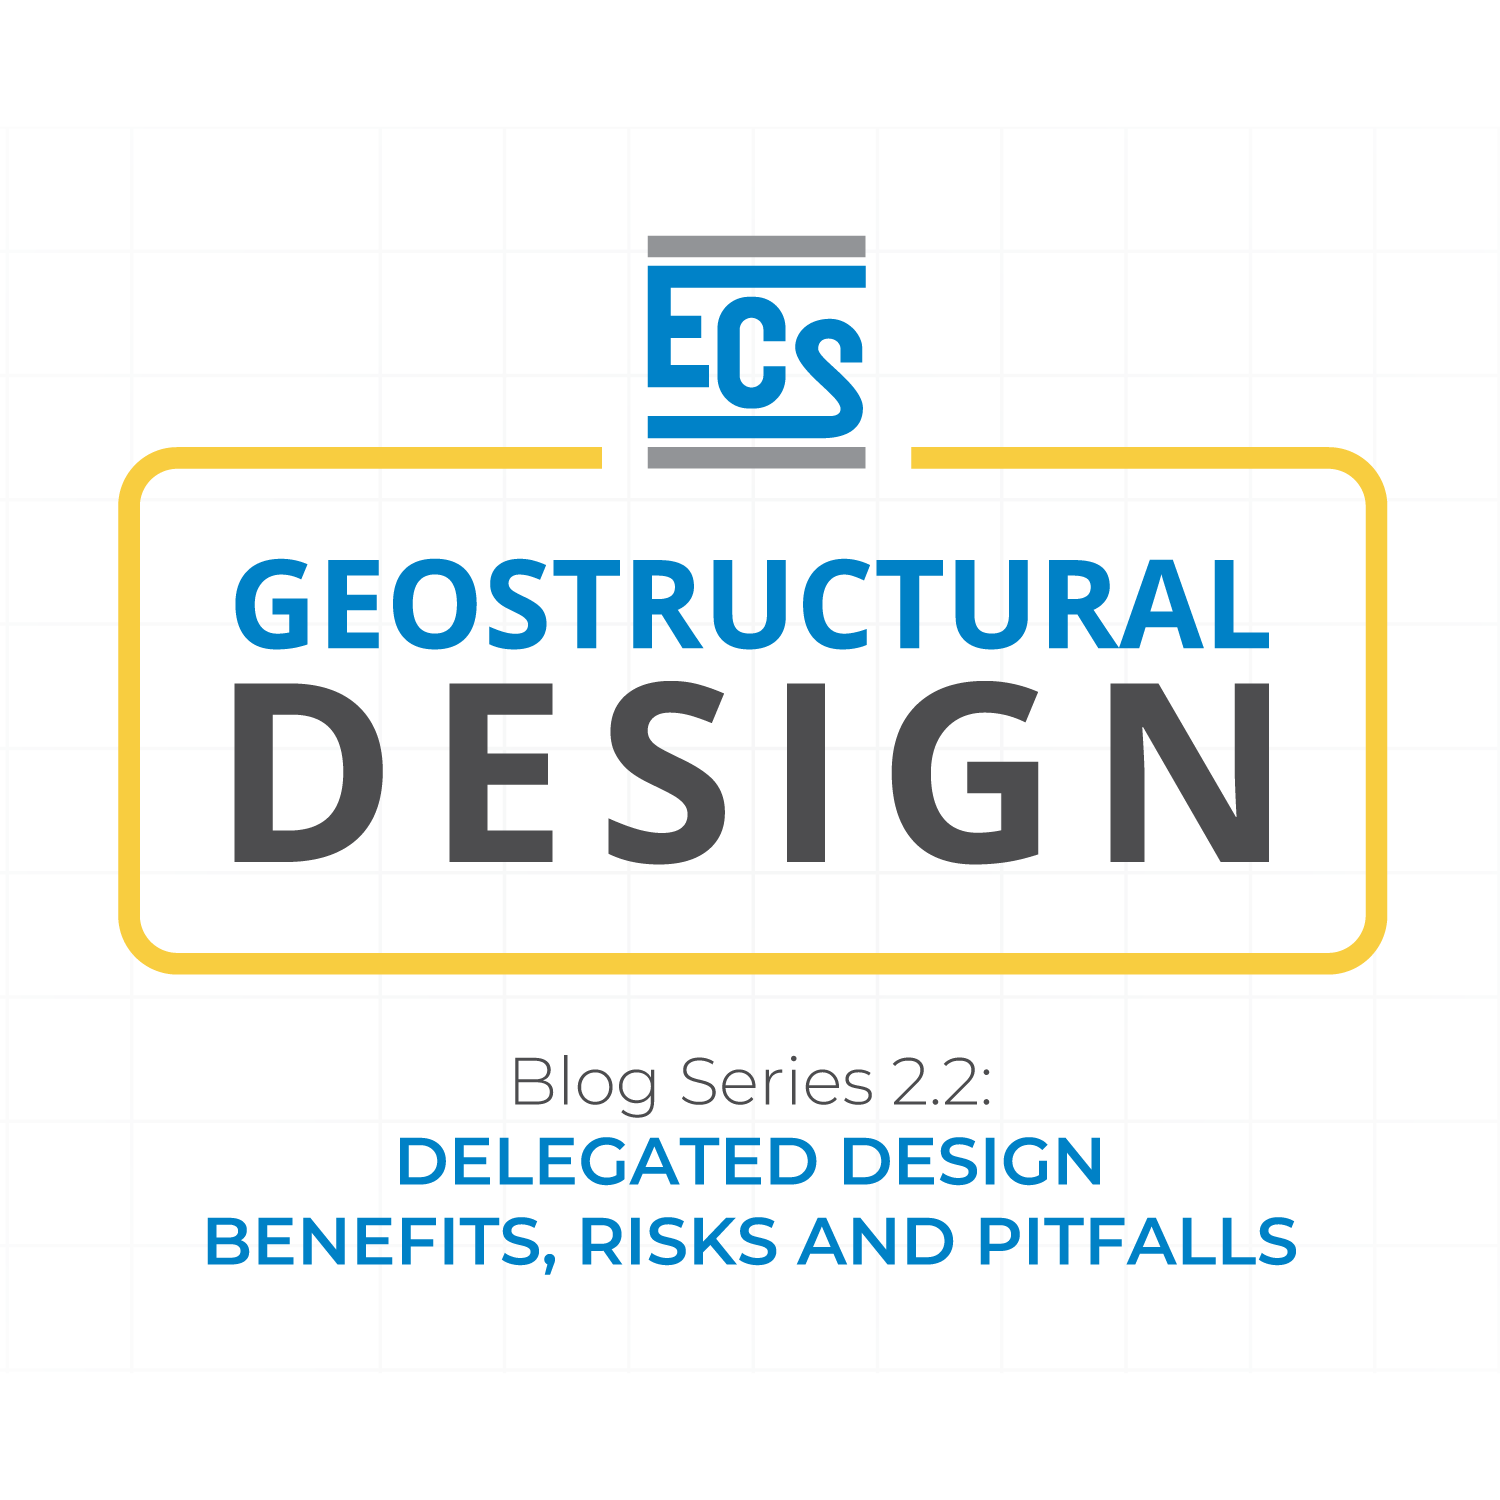 White space with light grey grid as background. In foreground, ECS logo in top third. Words "Geostructural Design" inside a yellow outline box in middle third. Bottom third says "Blog Series 2.2: Delegated Design Benefits, Risks and Pitfalls."